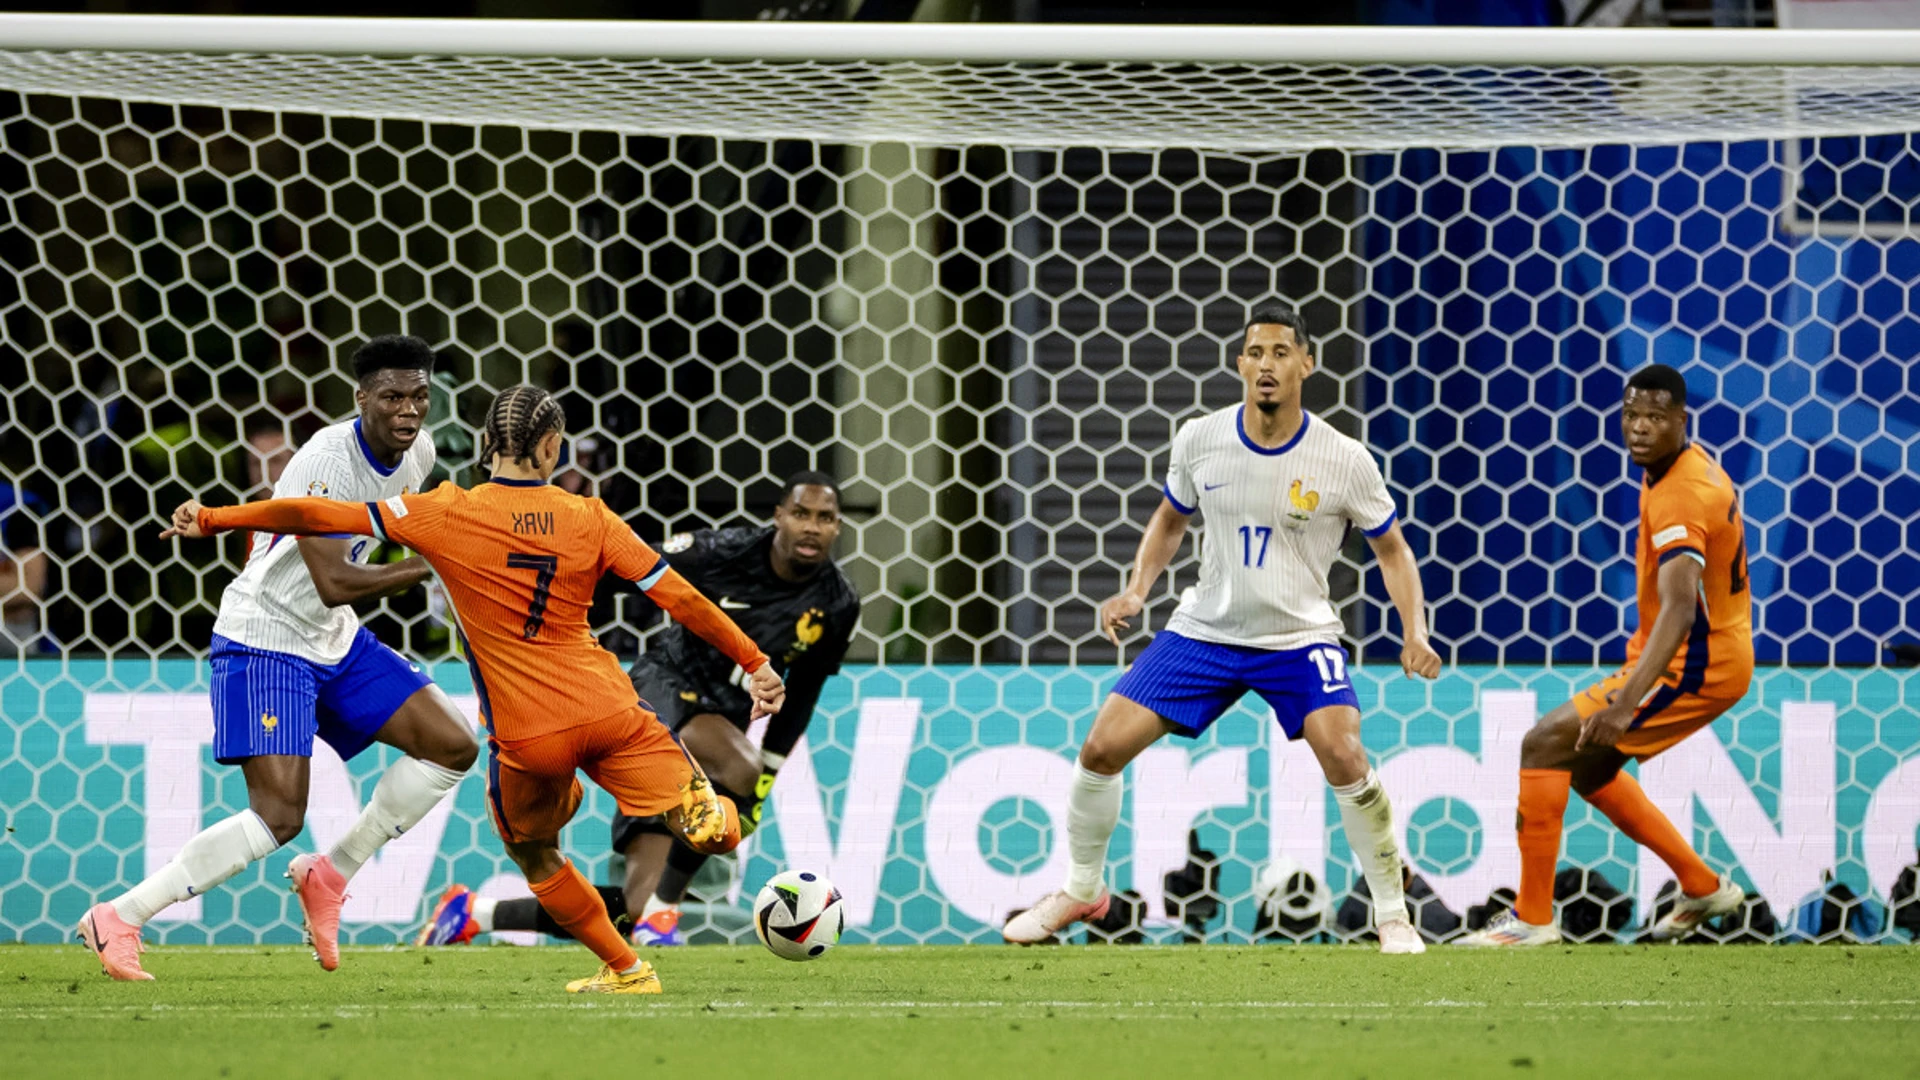 Netherlands coach Koeman says referee made mistake with disallowed goal